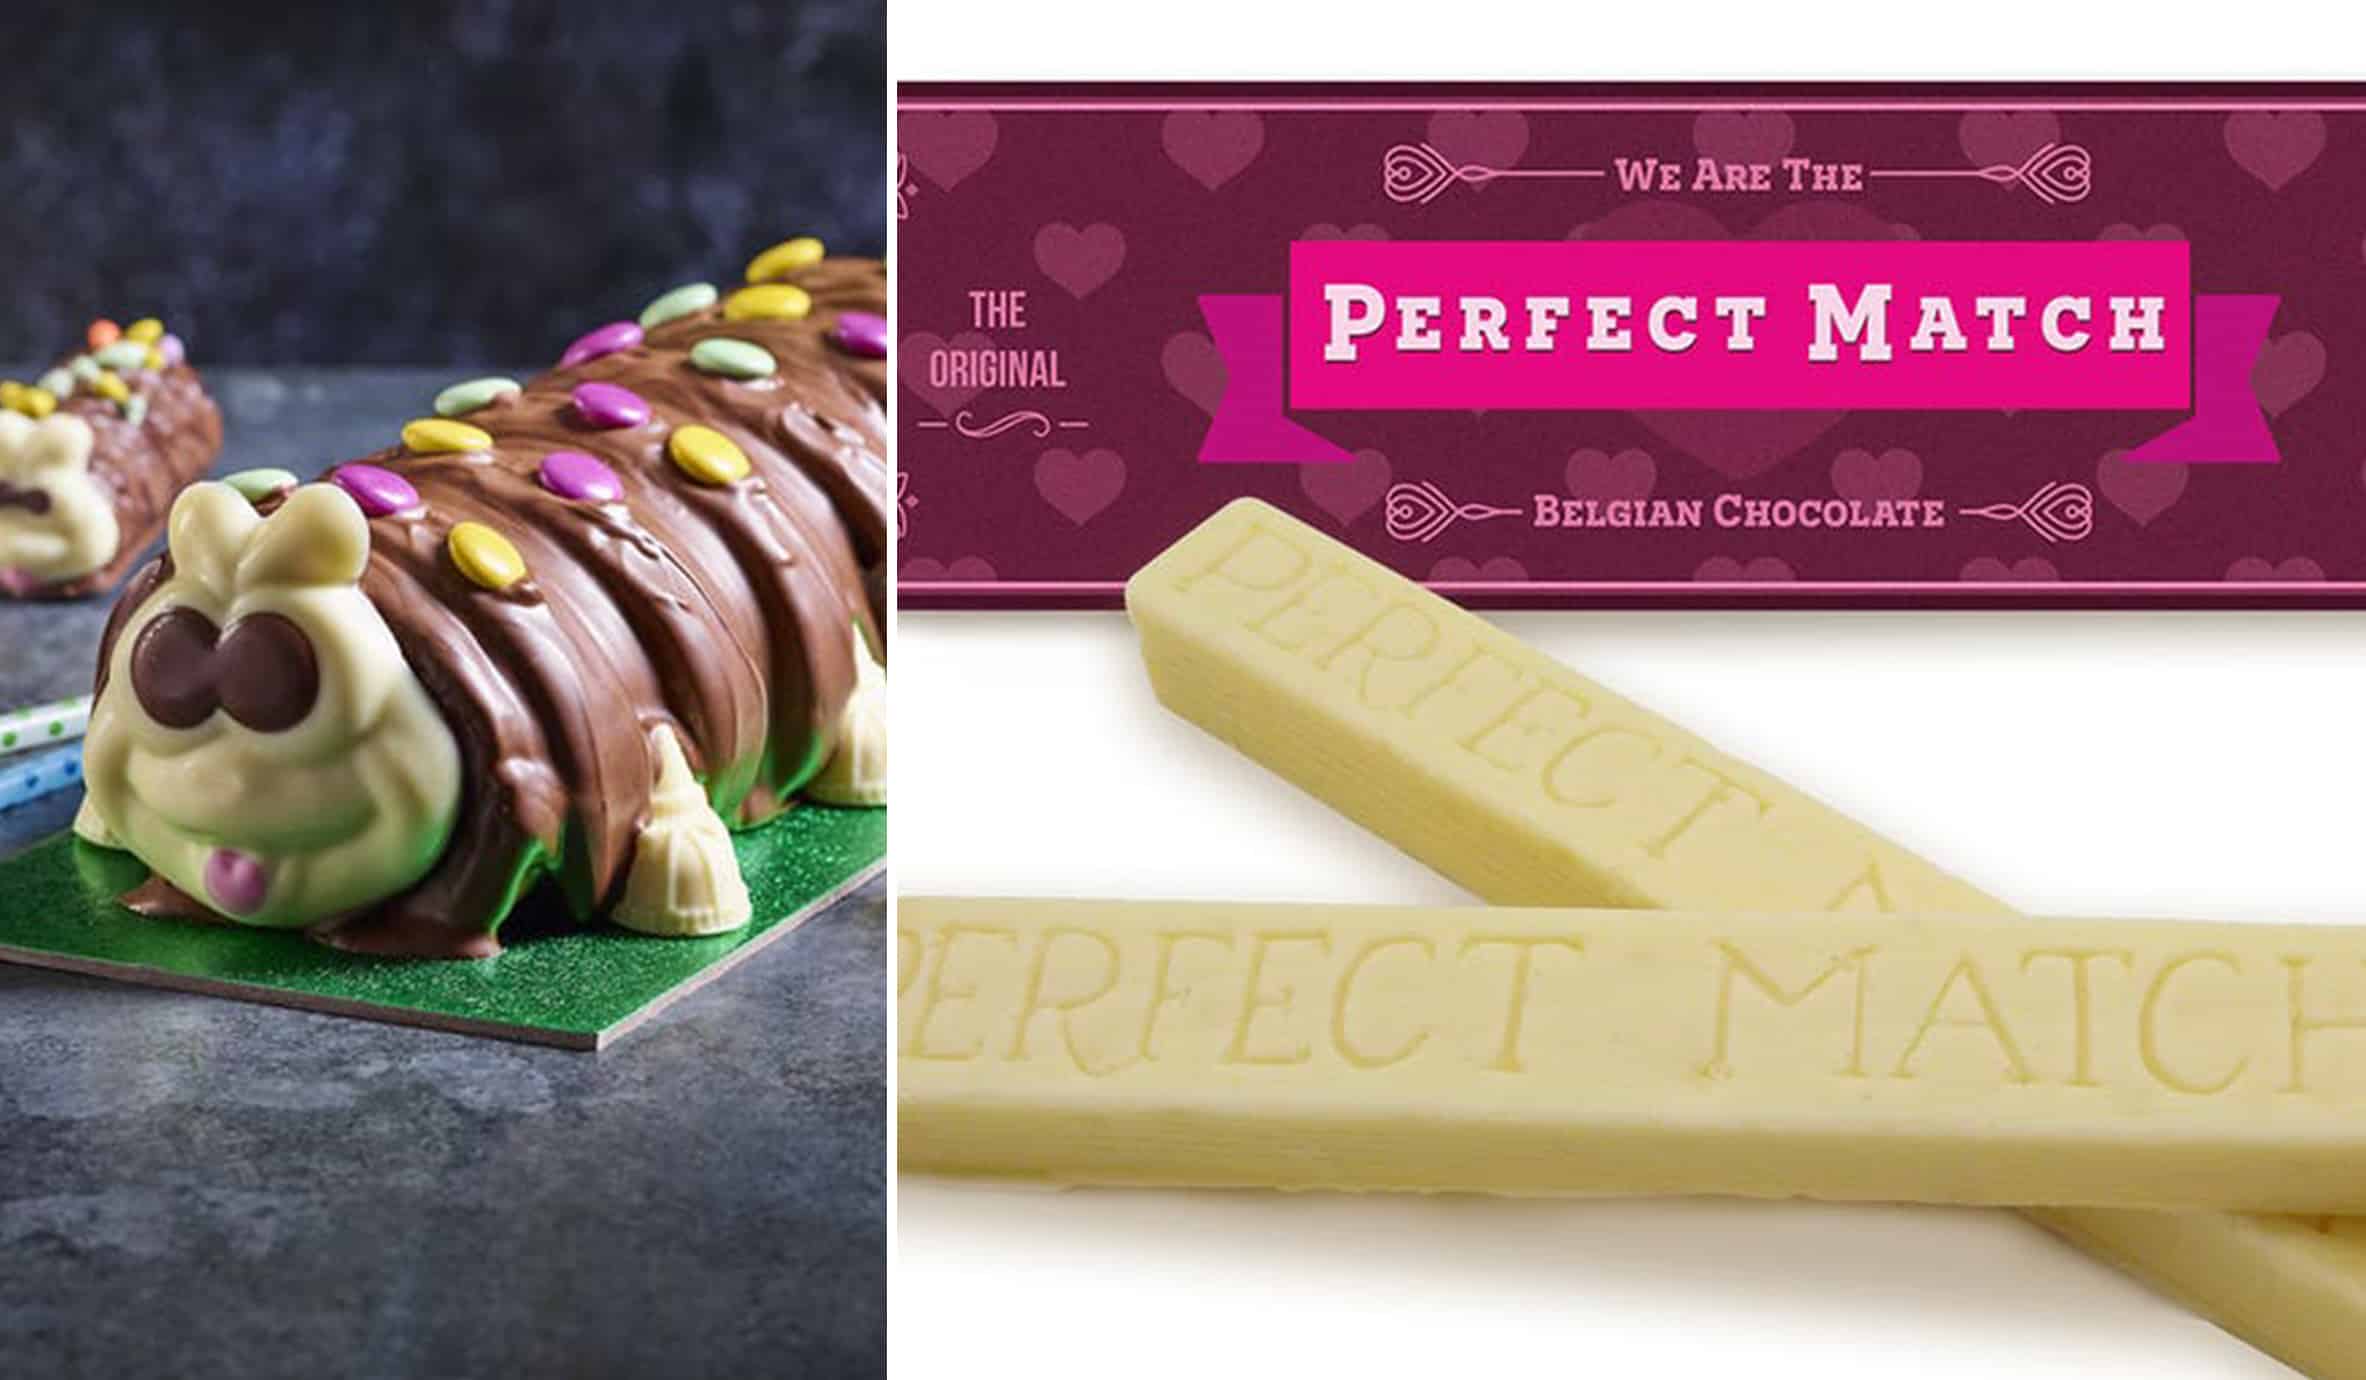 Cuthbert’s revenge: M&S concedes after family-run chocolatier accuses retailer of copying design